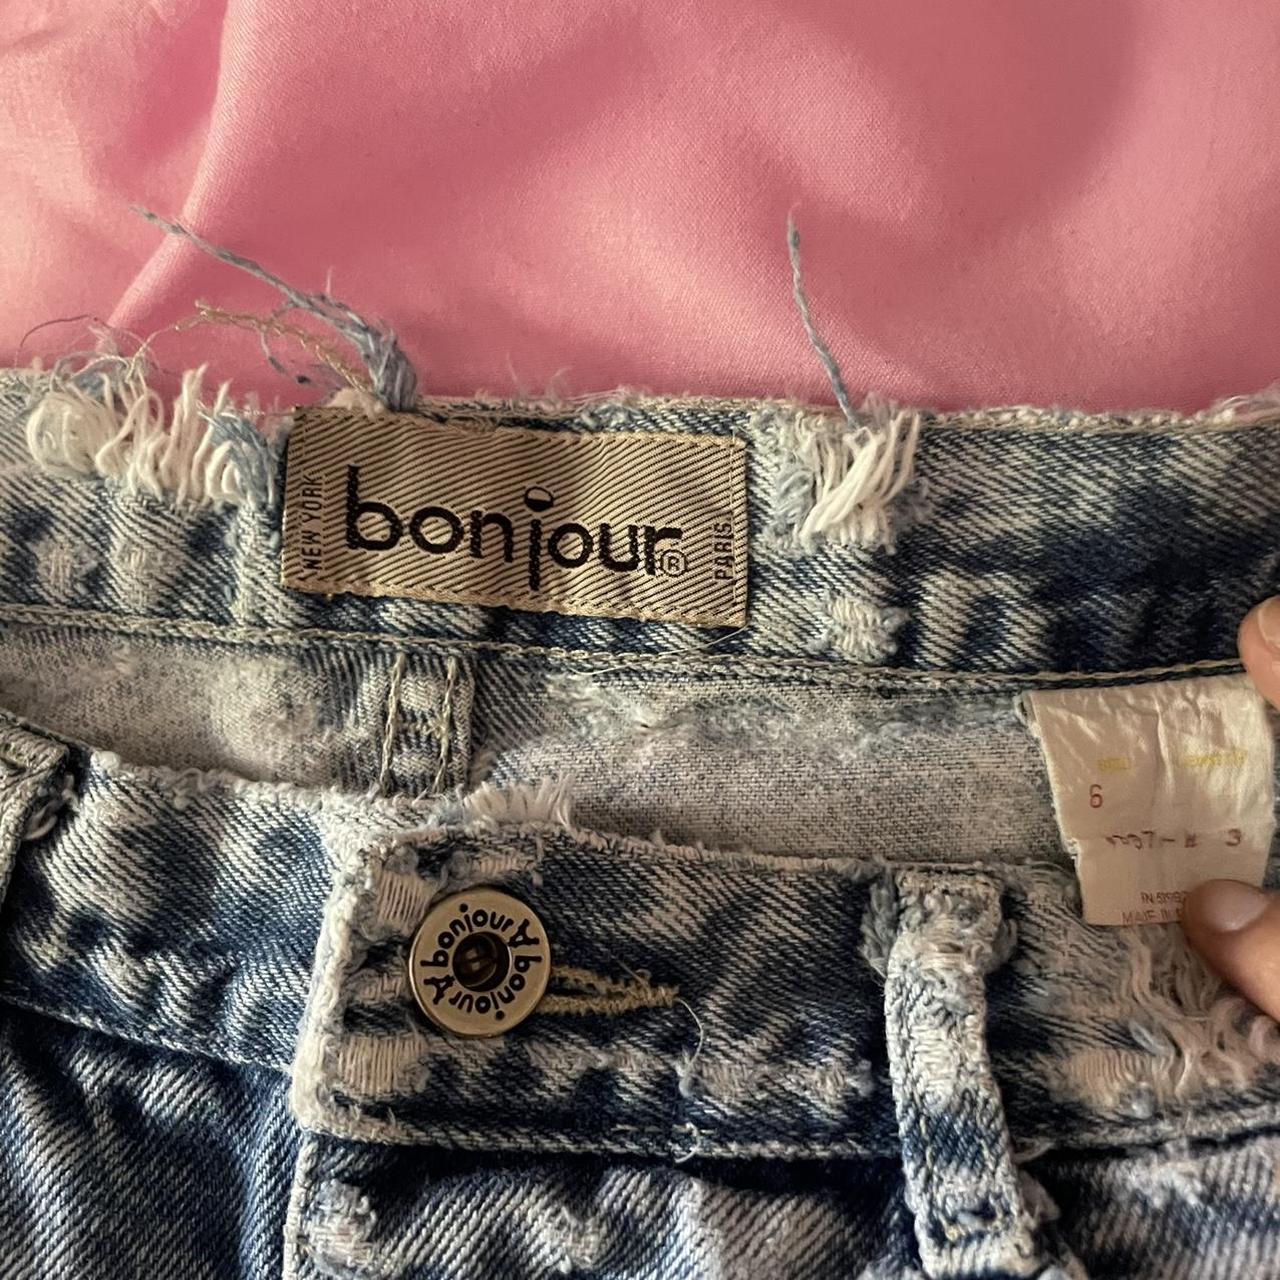 Product Image 2 - Distressed booty shorts 

jean shorts